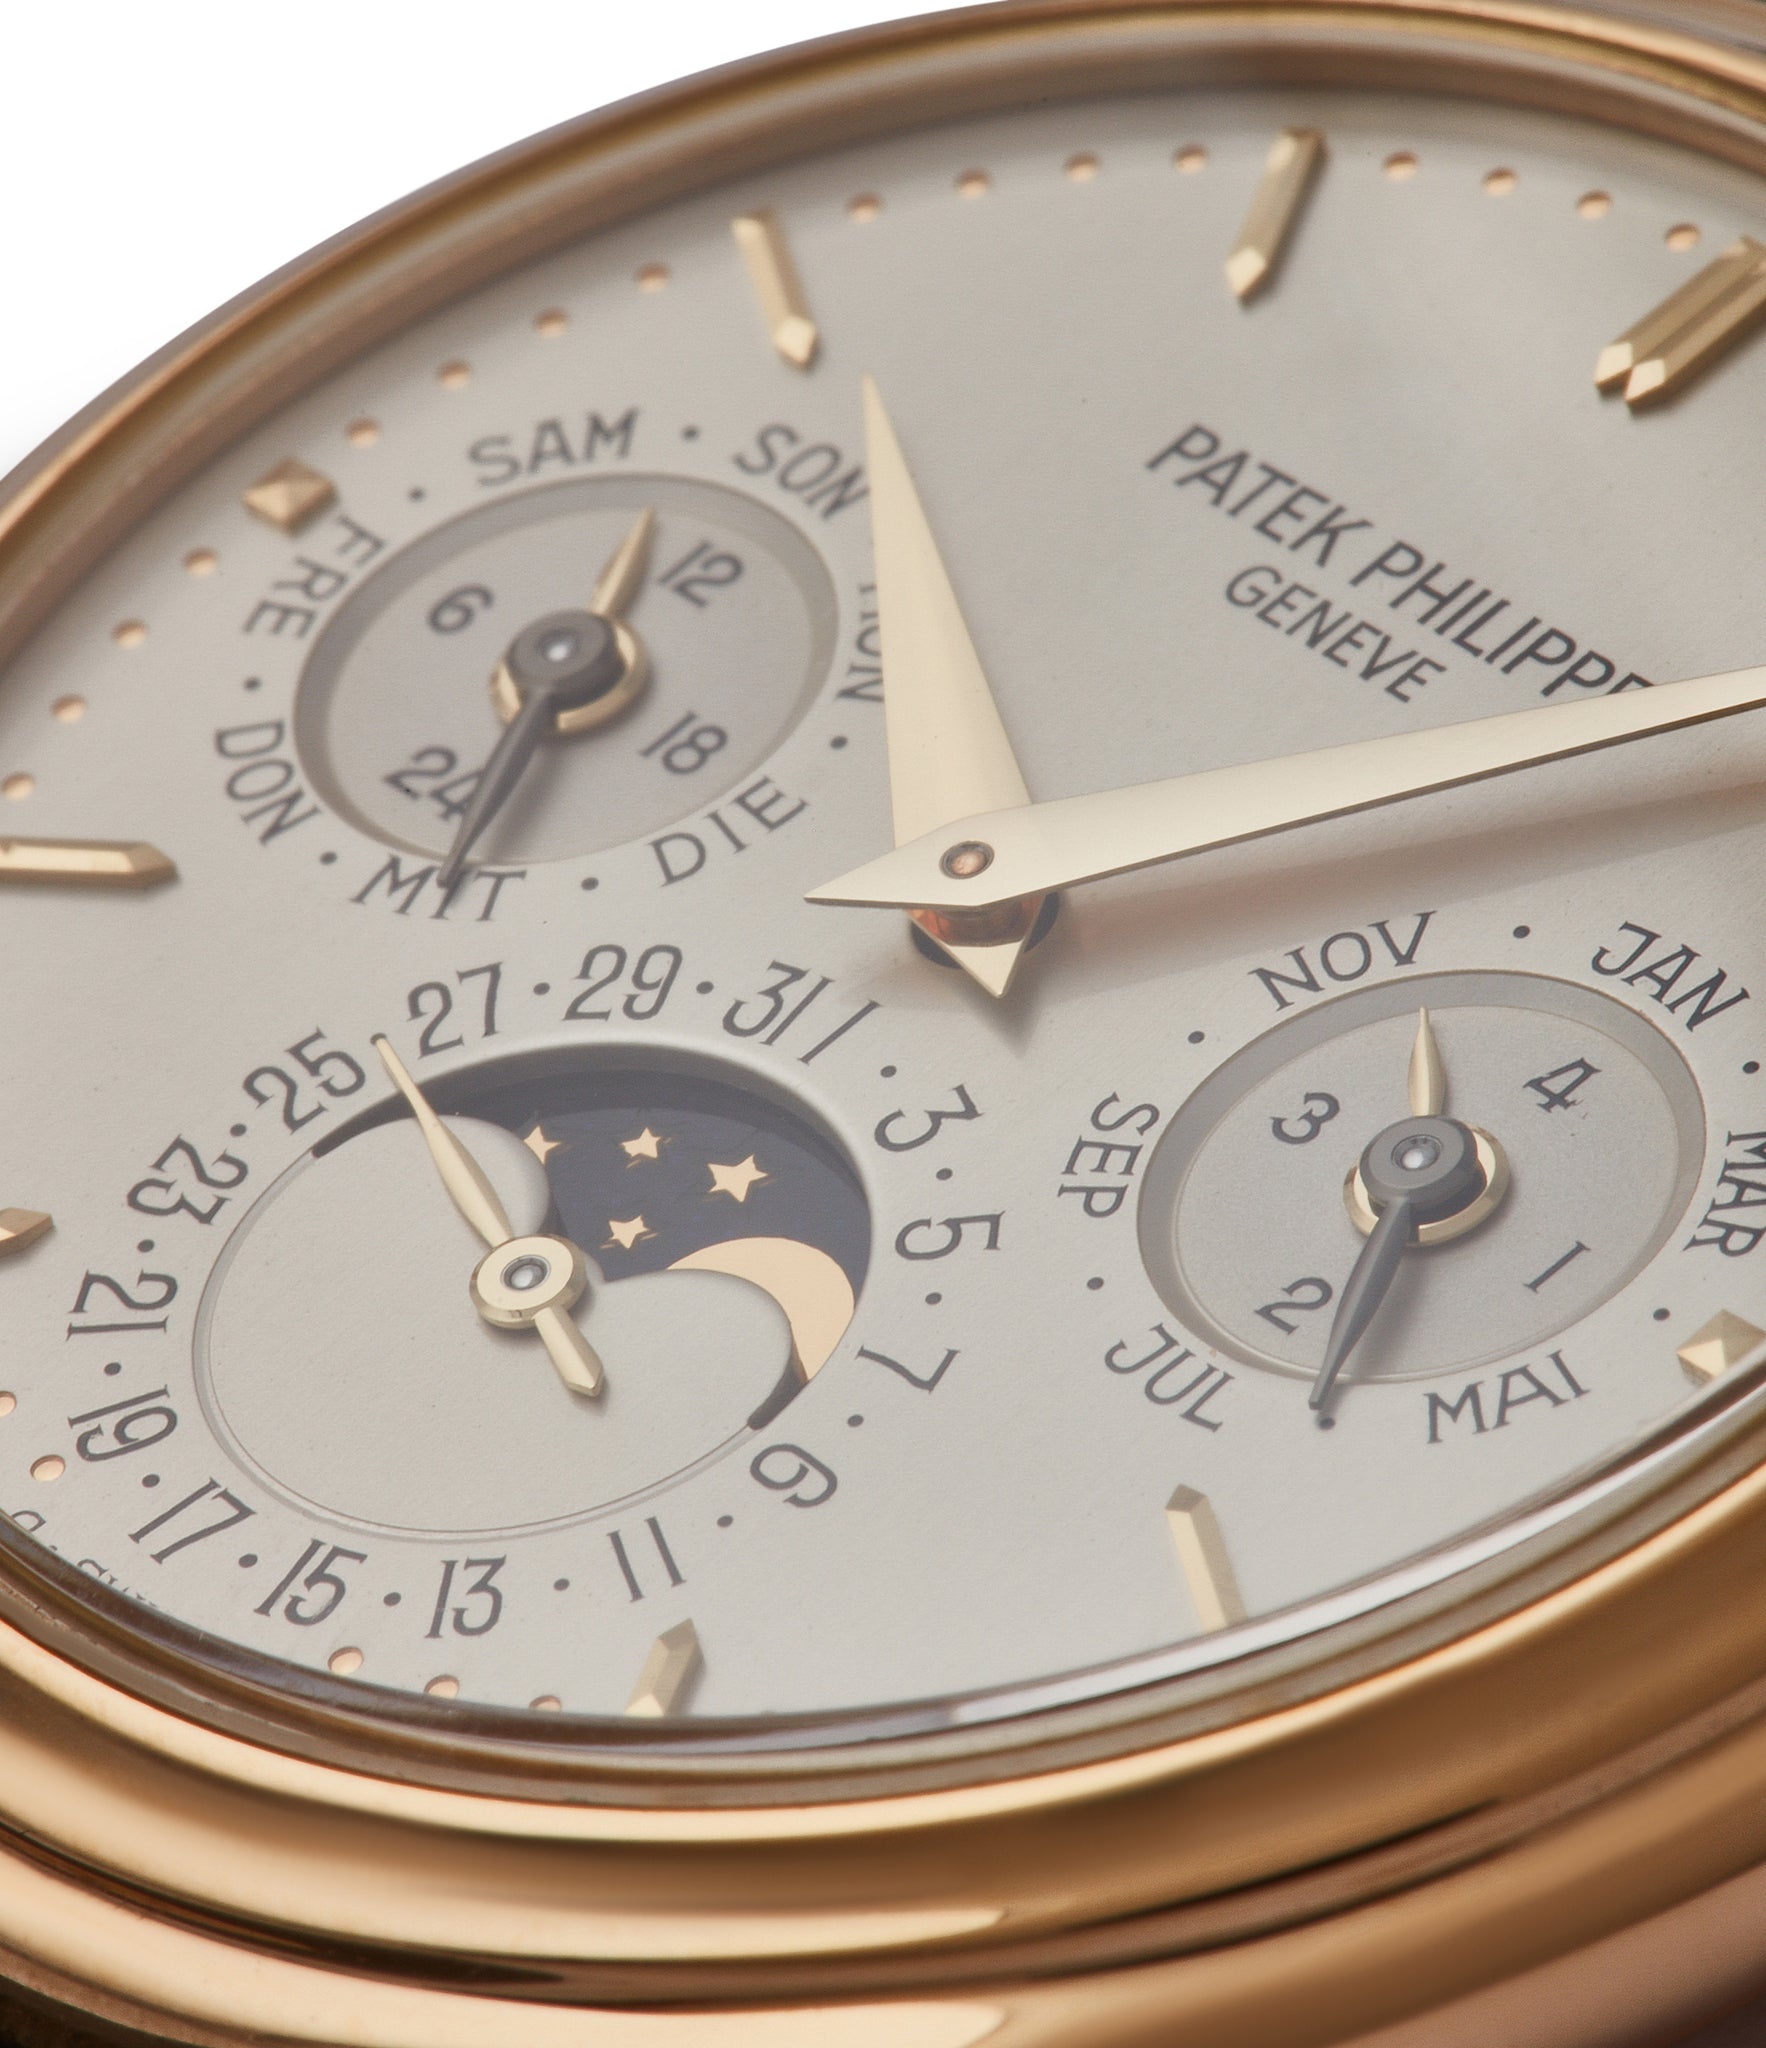 silver German dial Patek Philippe 3940J first series yellow gold perpetual calendar dress watch for sale online at A Collected Man London